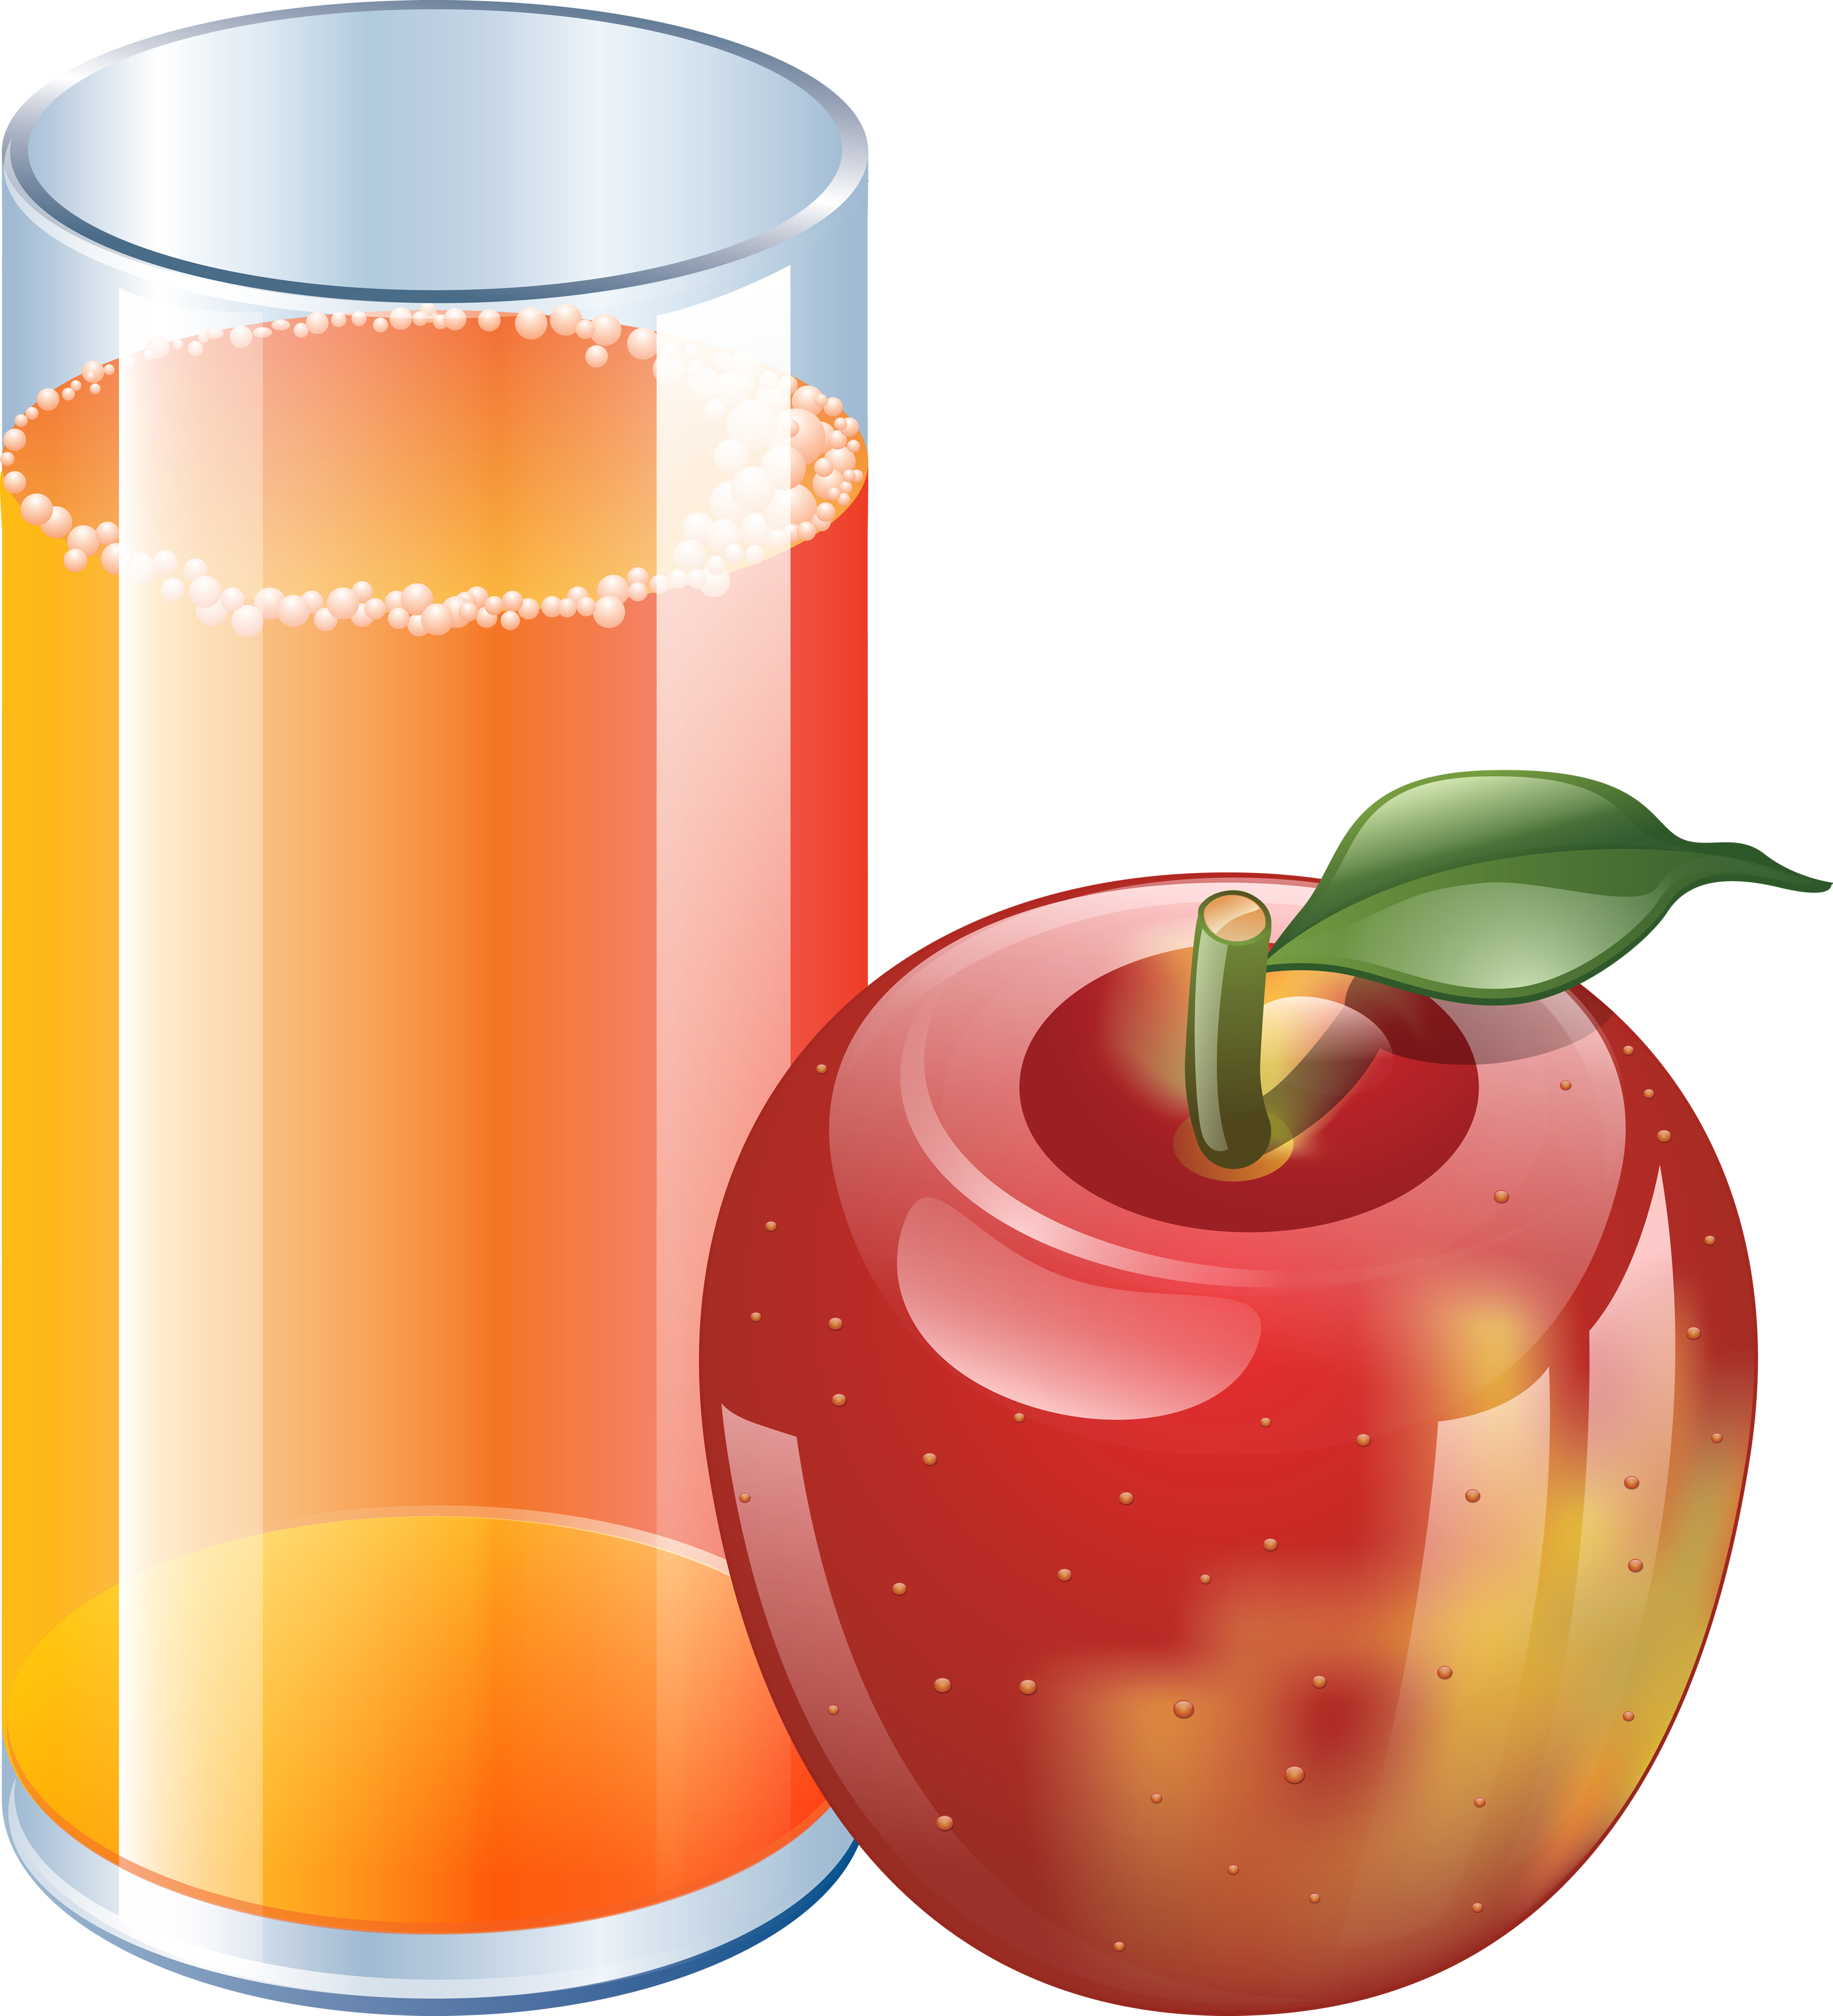 juice clipart free download - photo #6